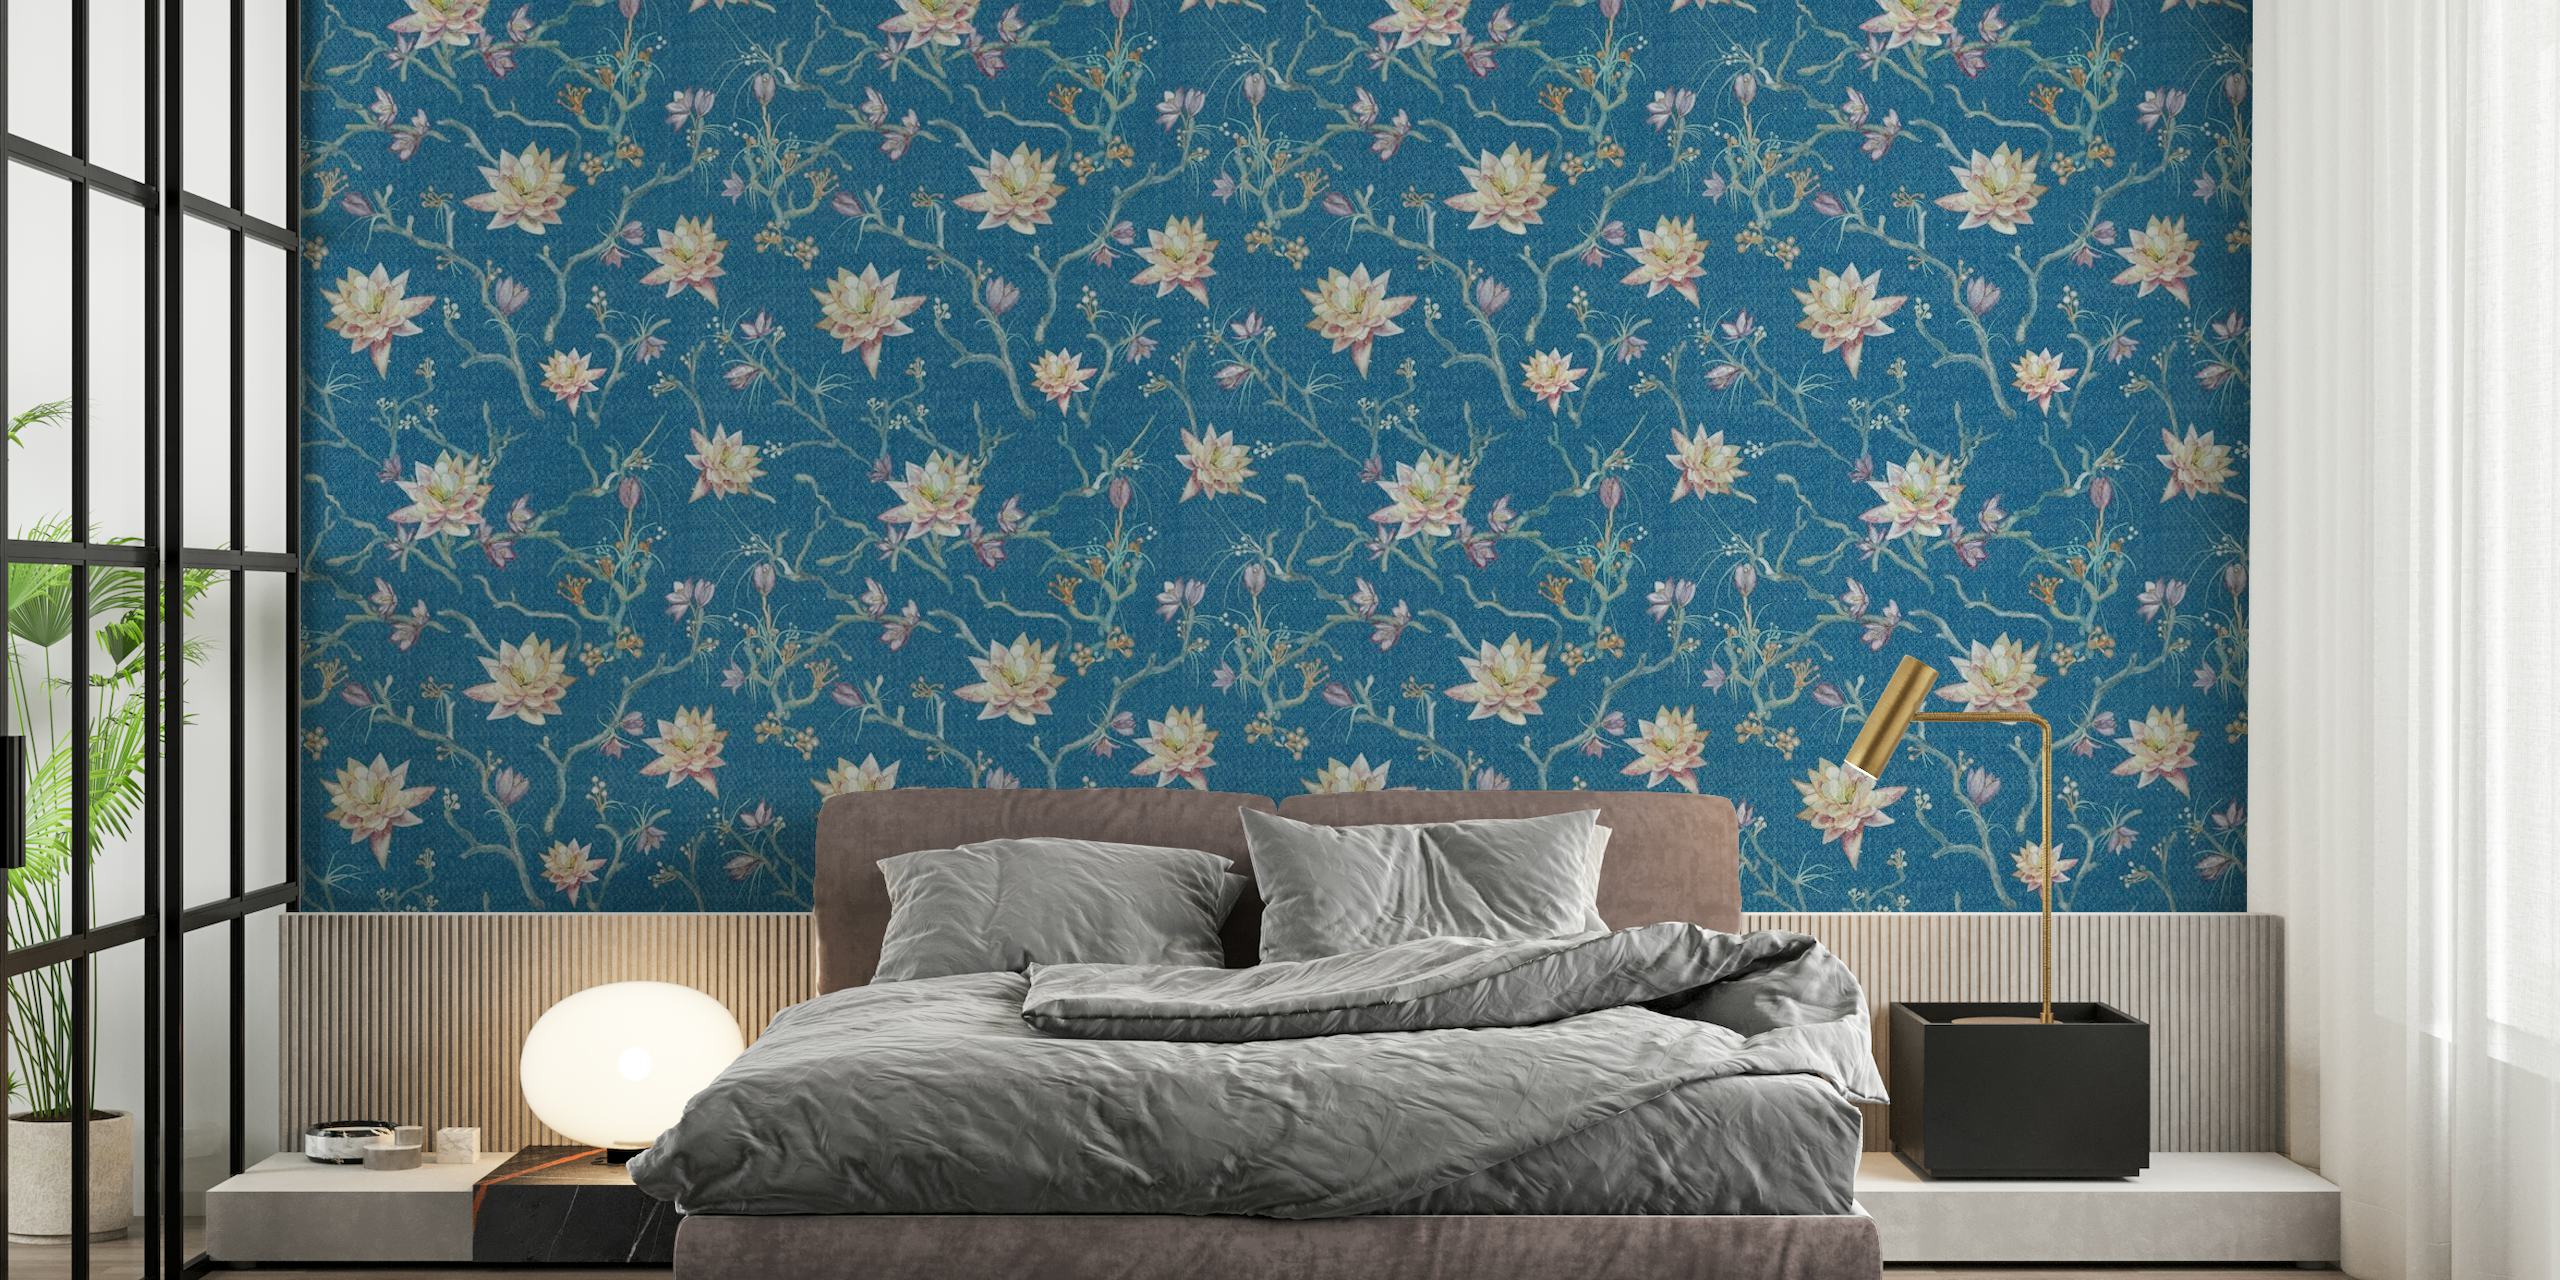 Spring Lotus wall mural with blue background and white blooming lotus flowers